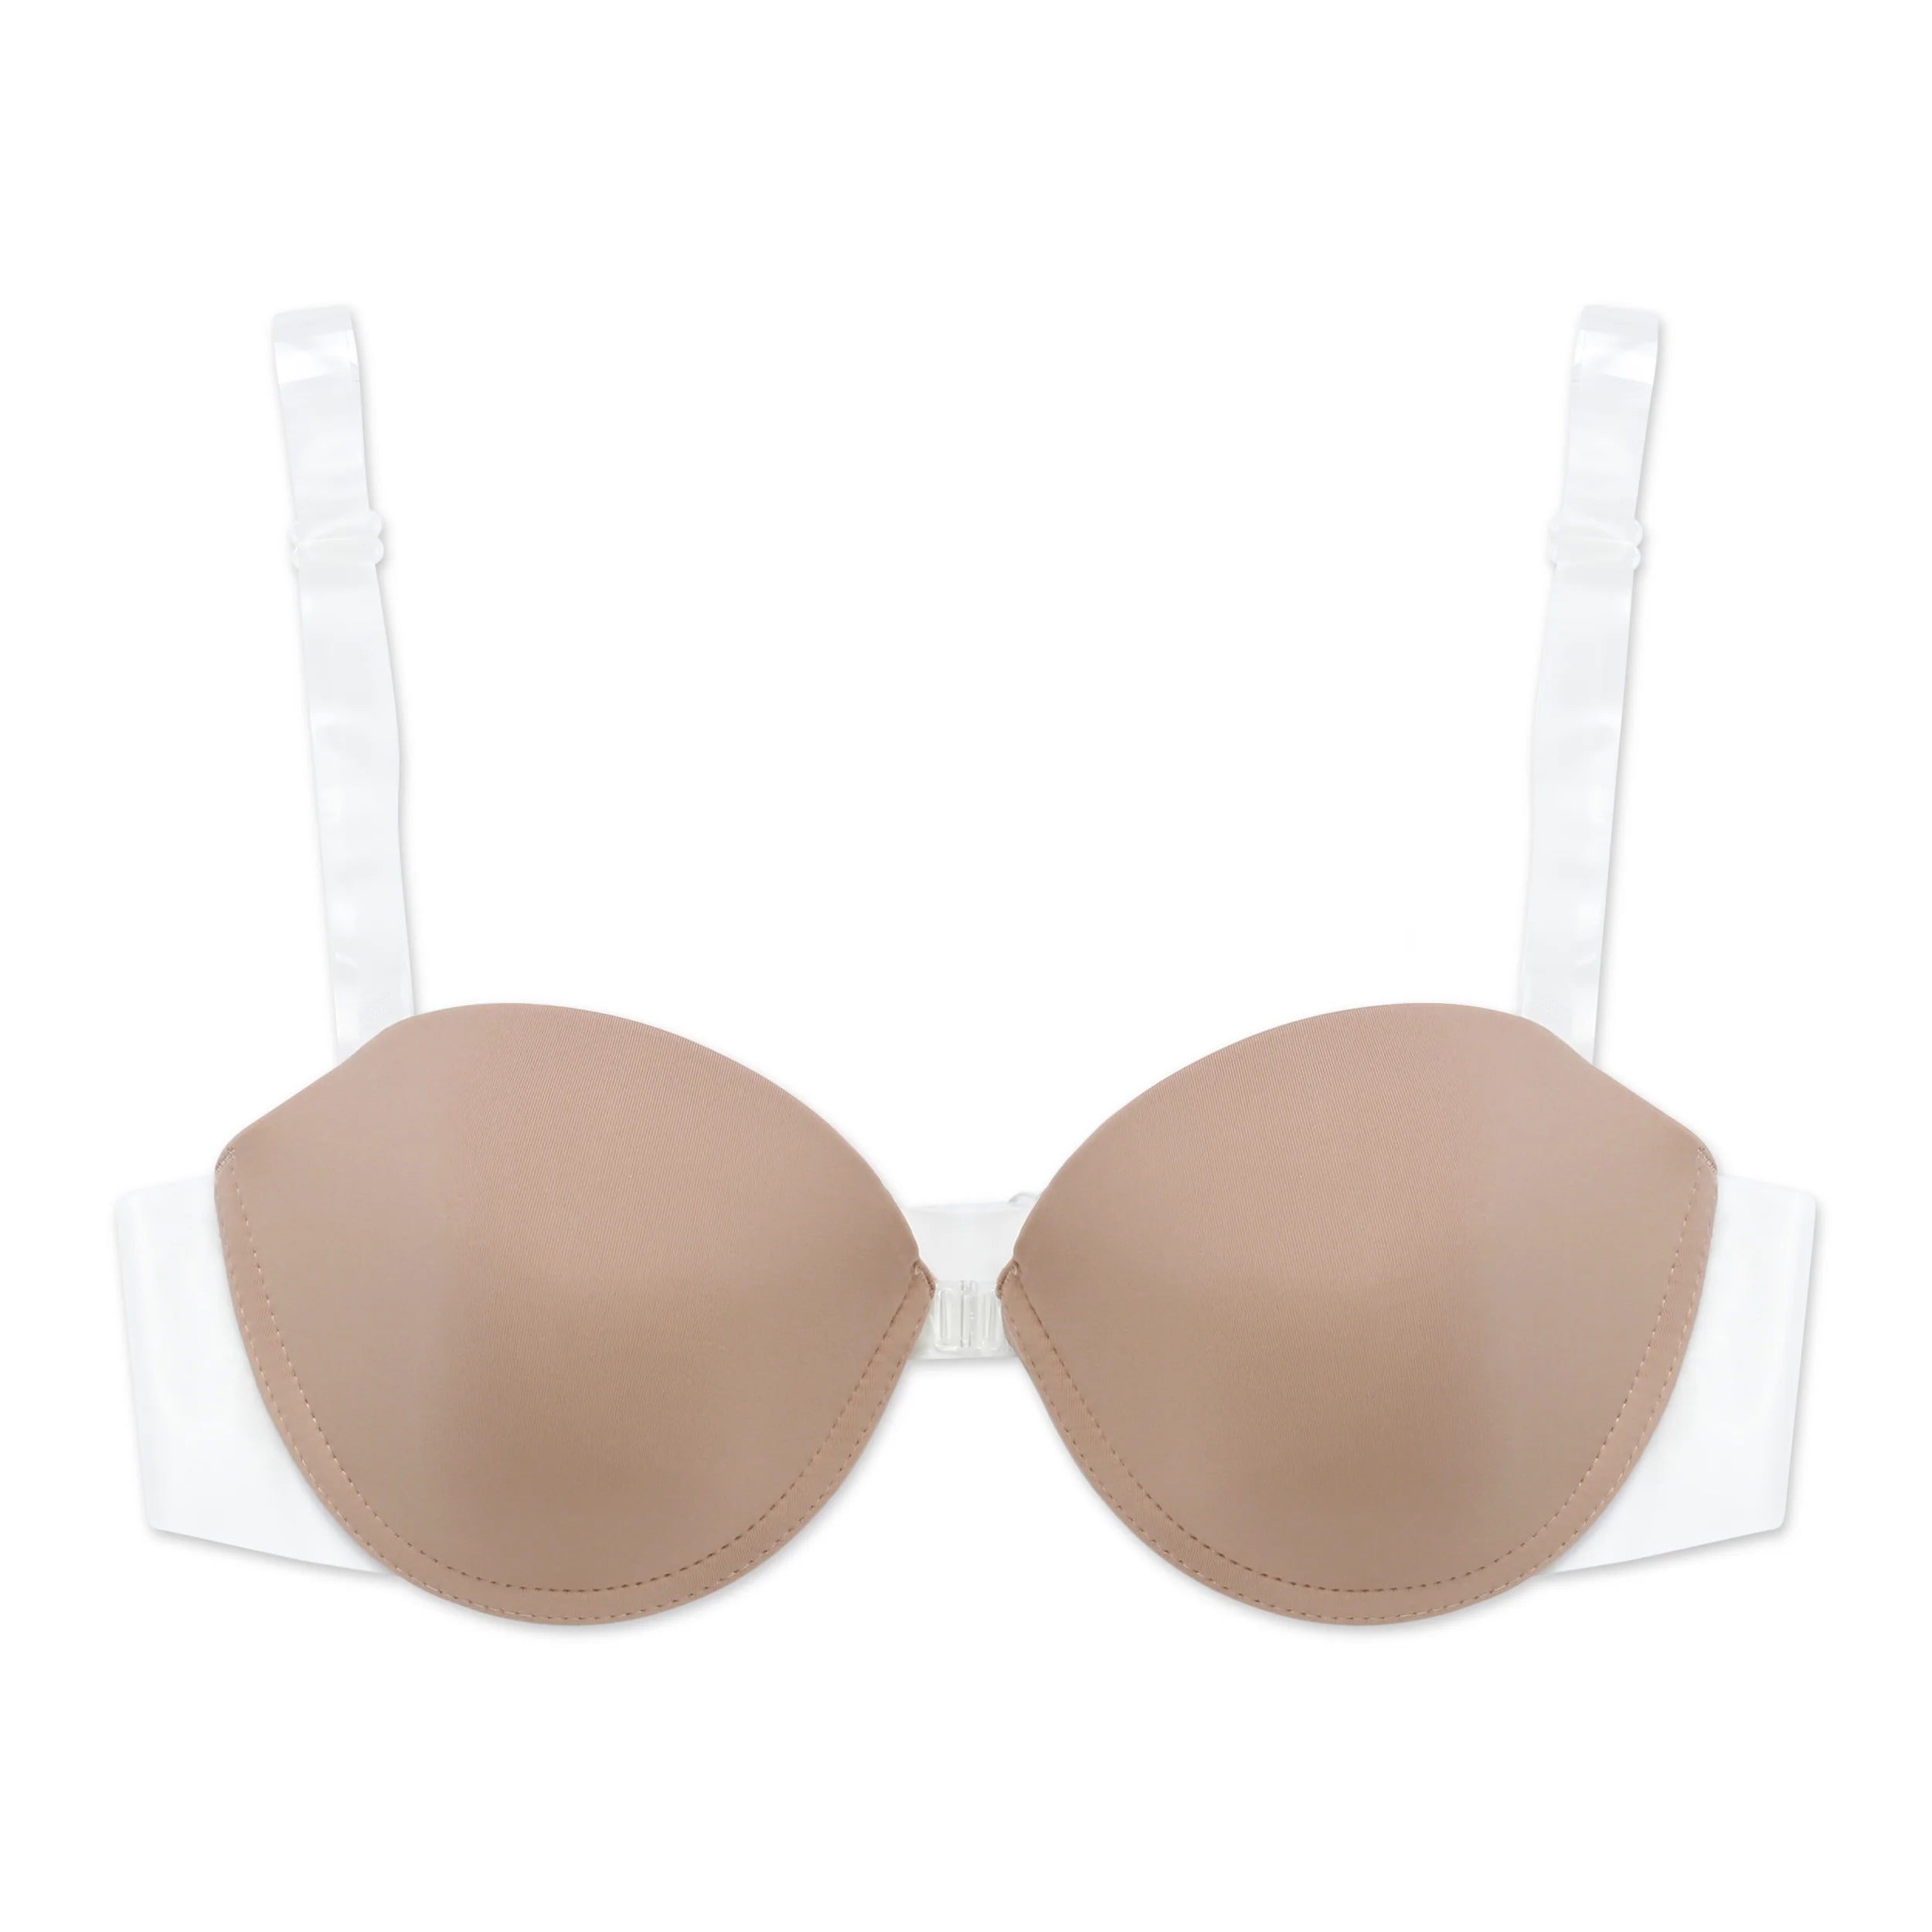 Nude bra with clear straps-AB06